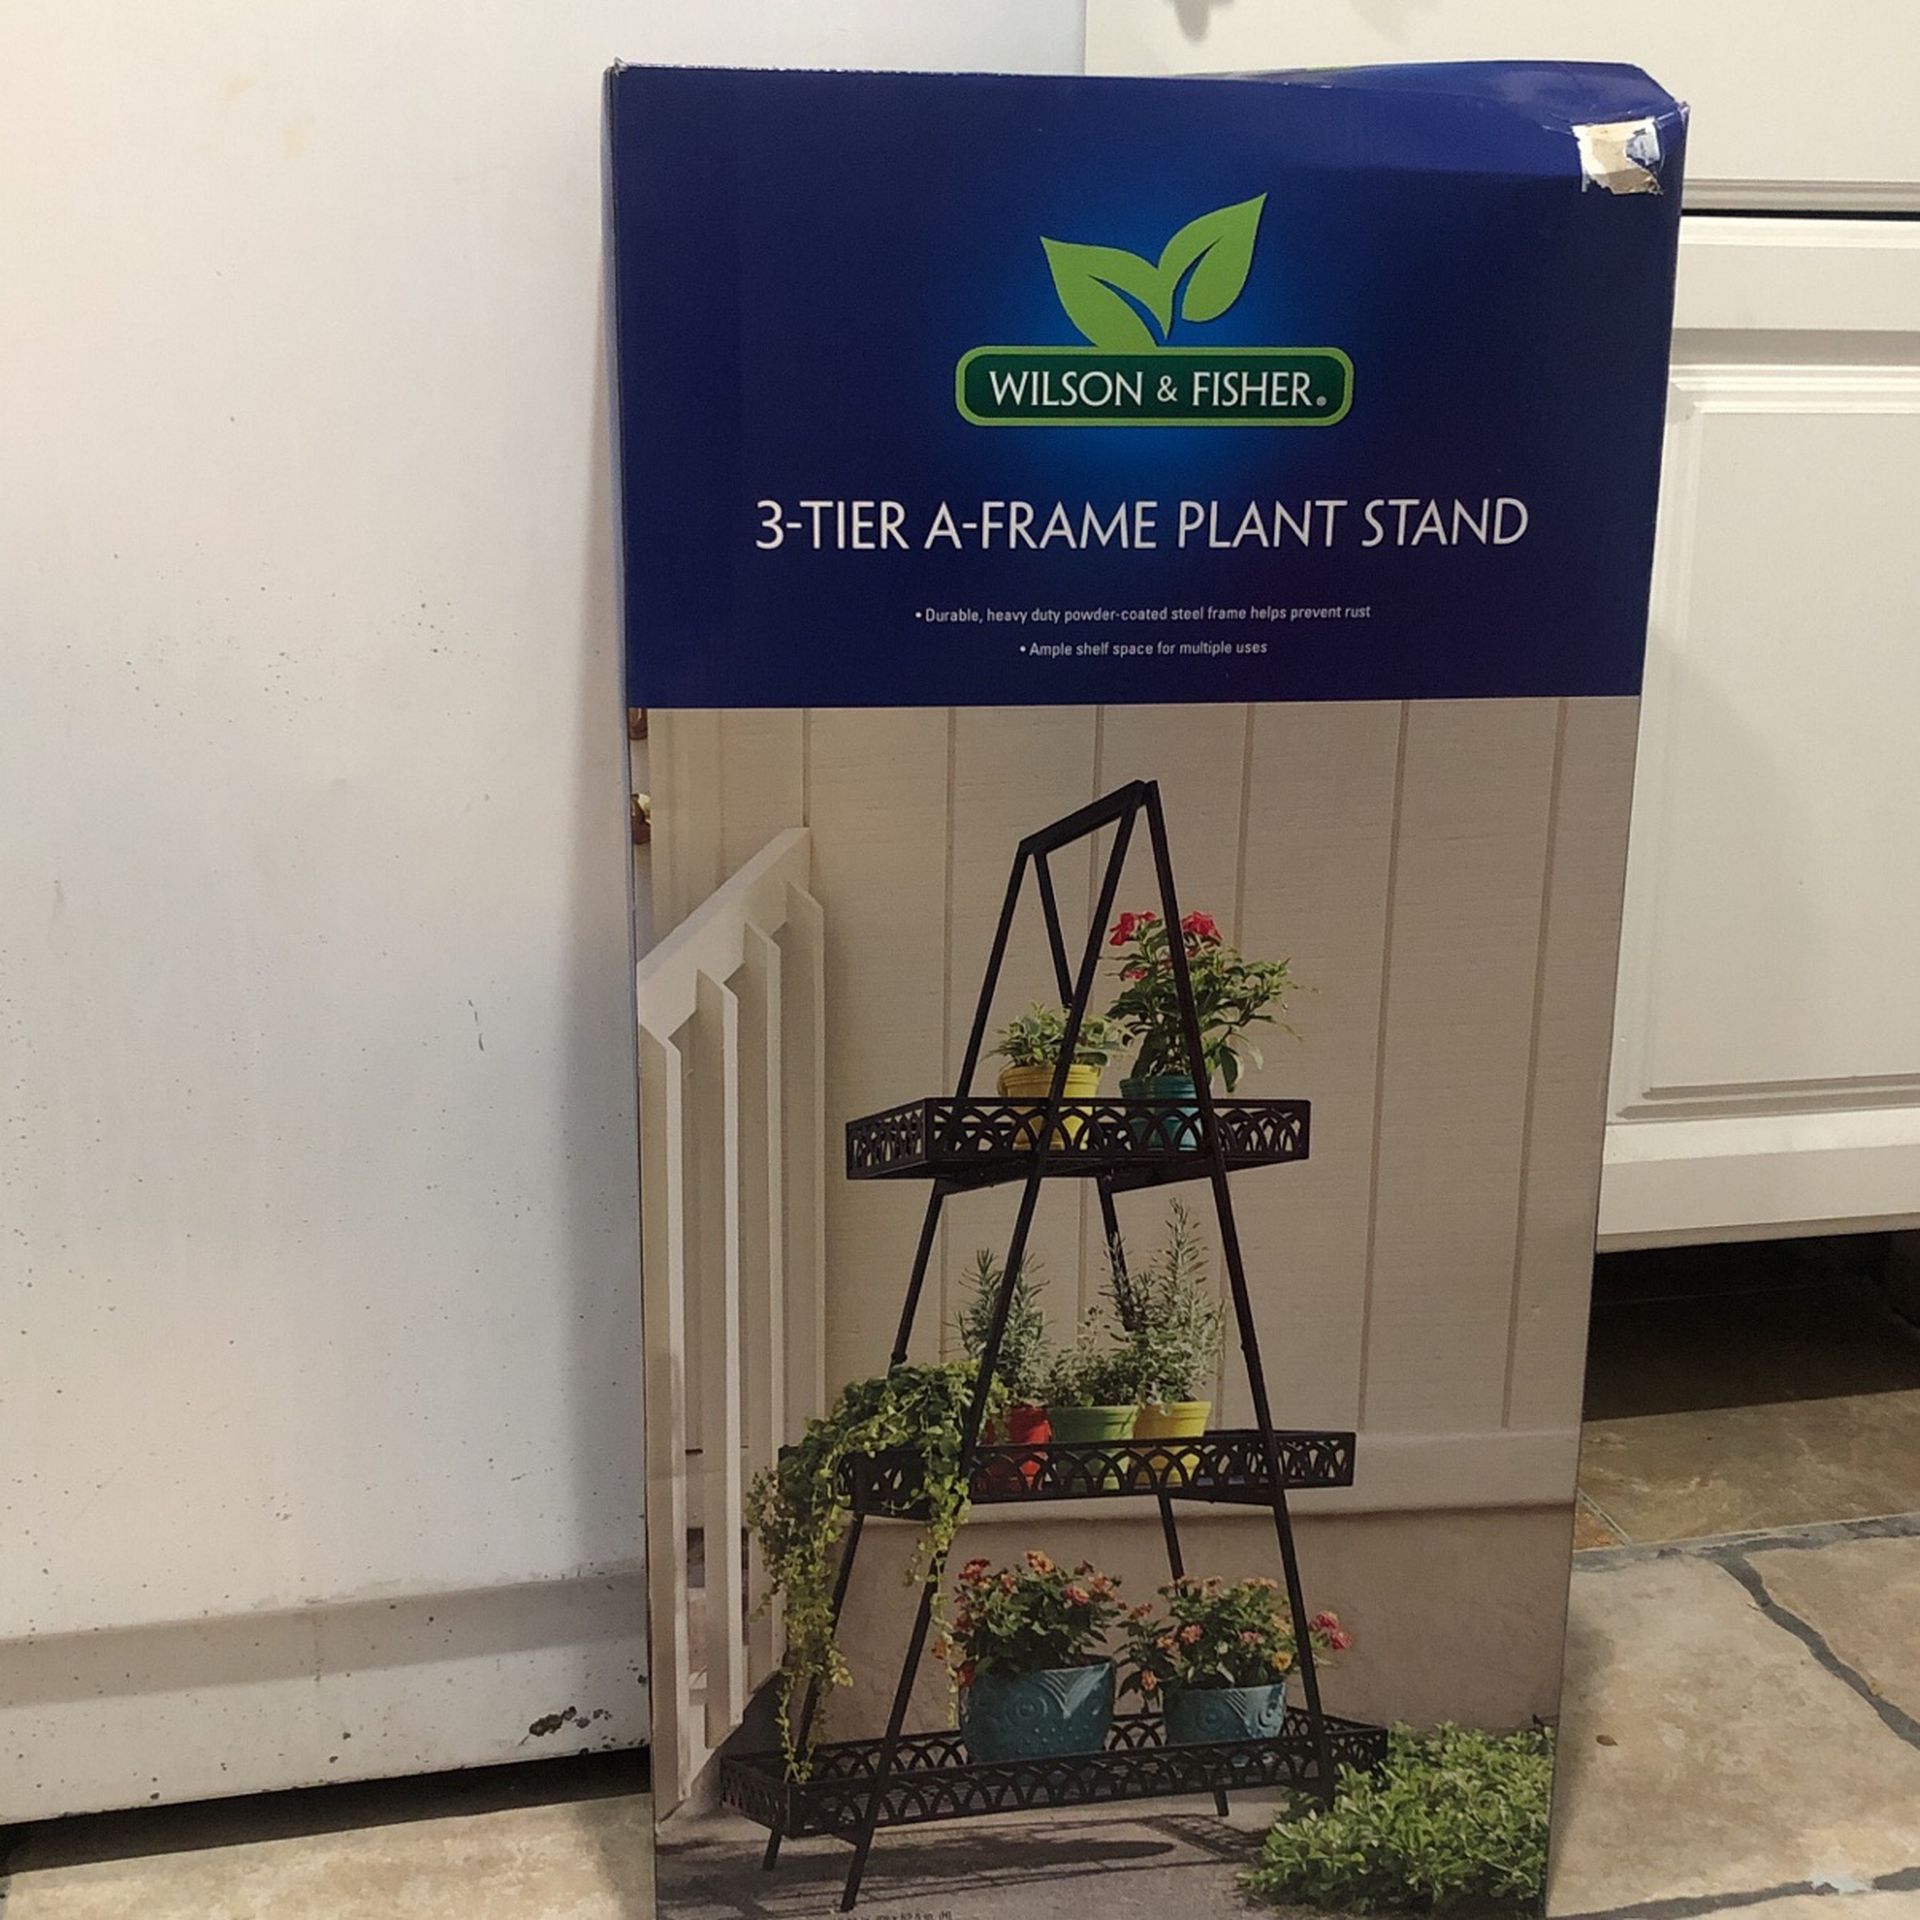 New 3-tier A-frame Plant Stand !!!!